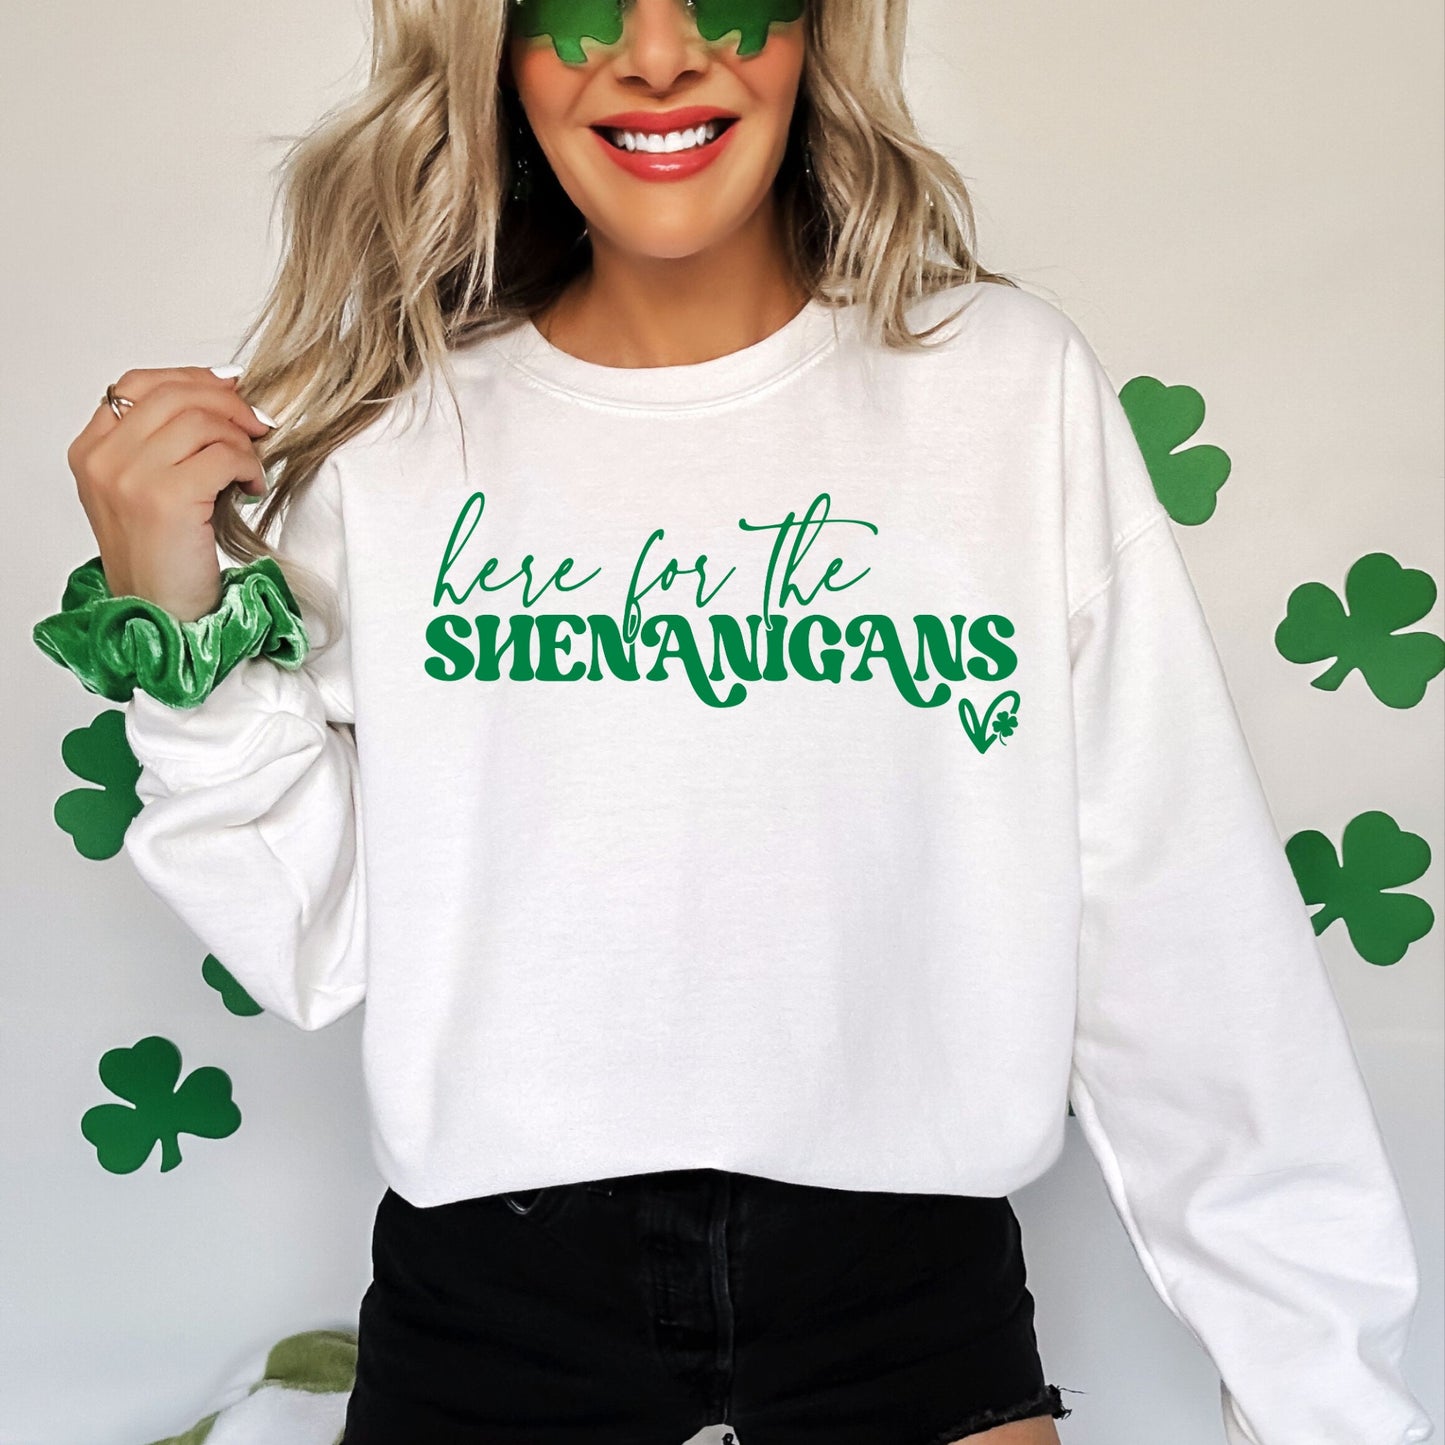 Here For The Shenanigans Sweatshirt-2 COLORS